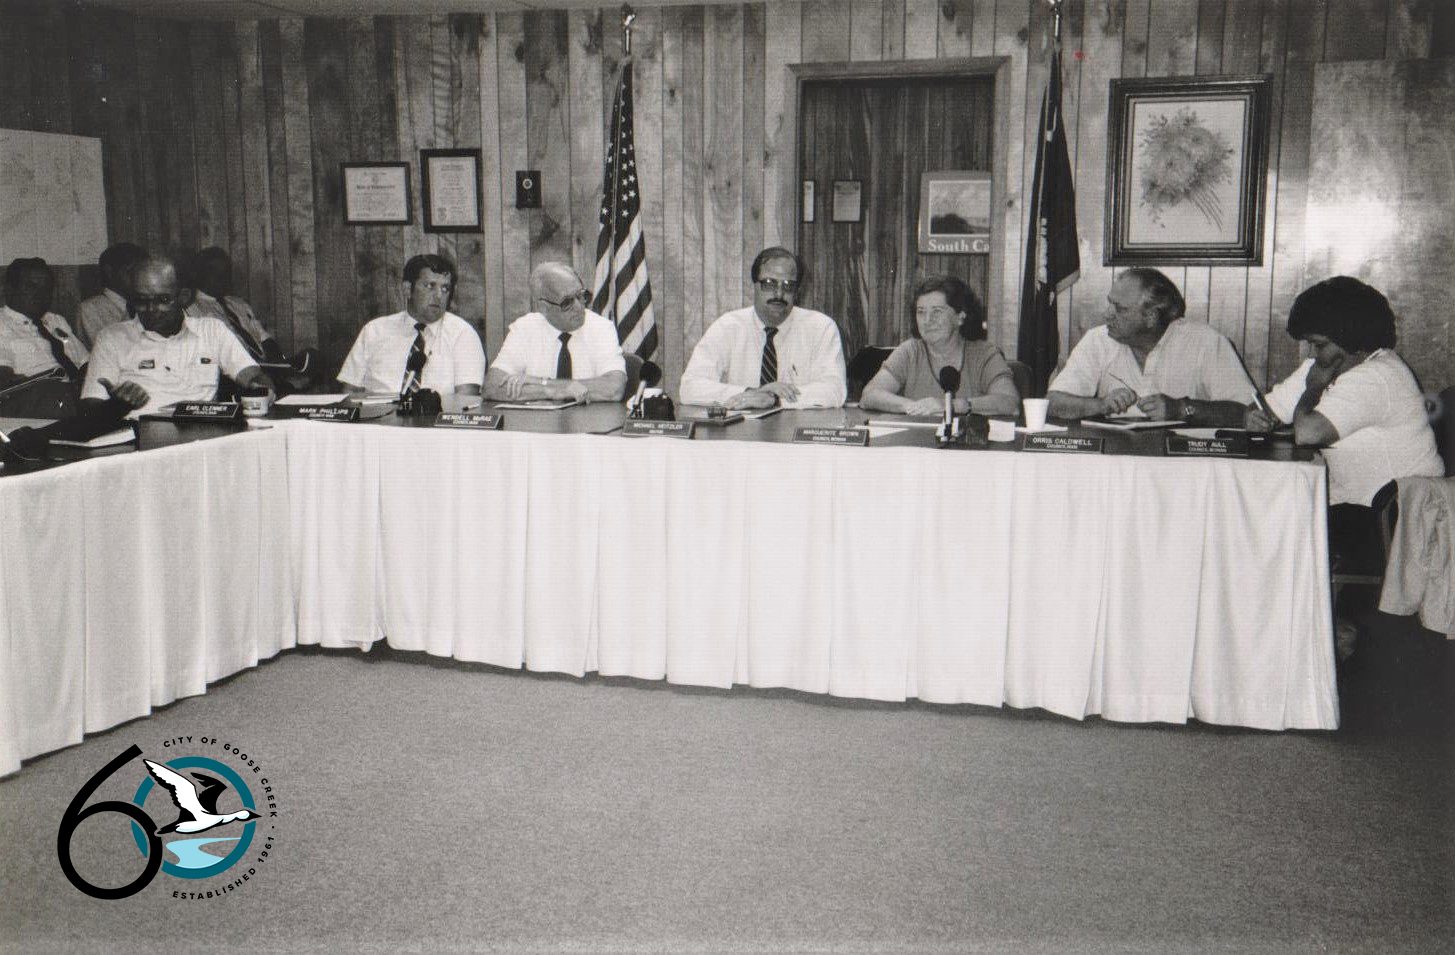 Goose Creek City Council in 1986